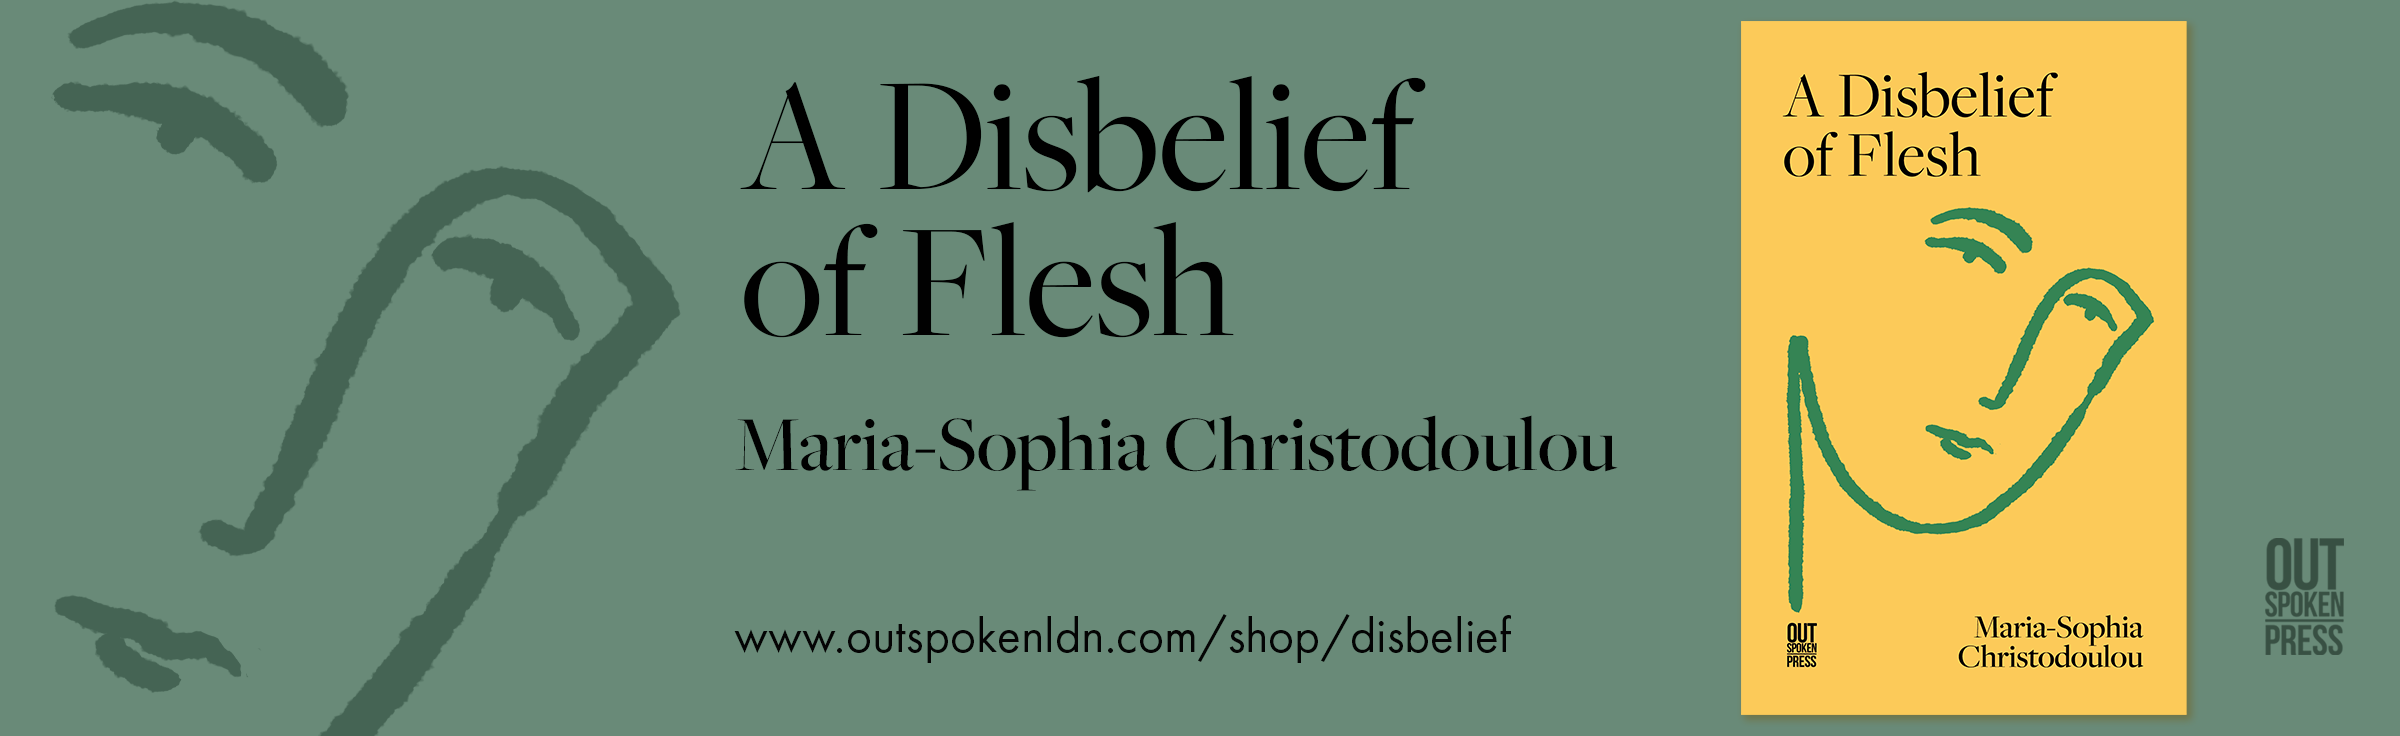 A Disbelief of Flesh Maria Sophia Christodoulou shop banner x.png